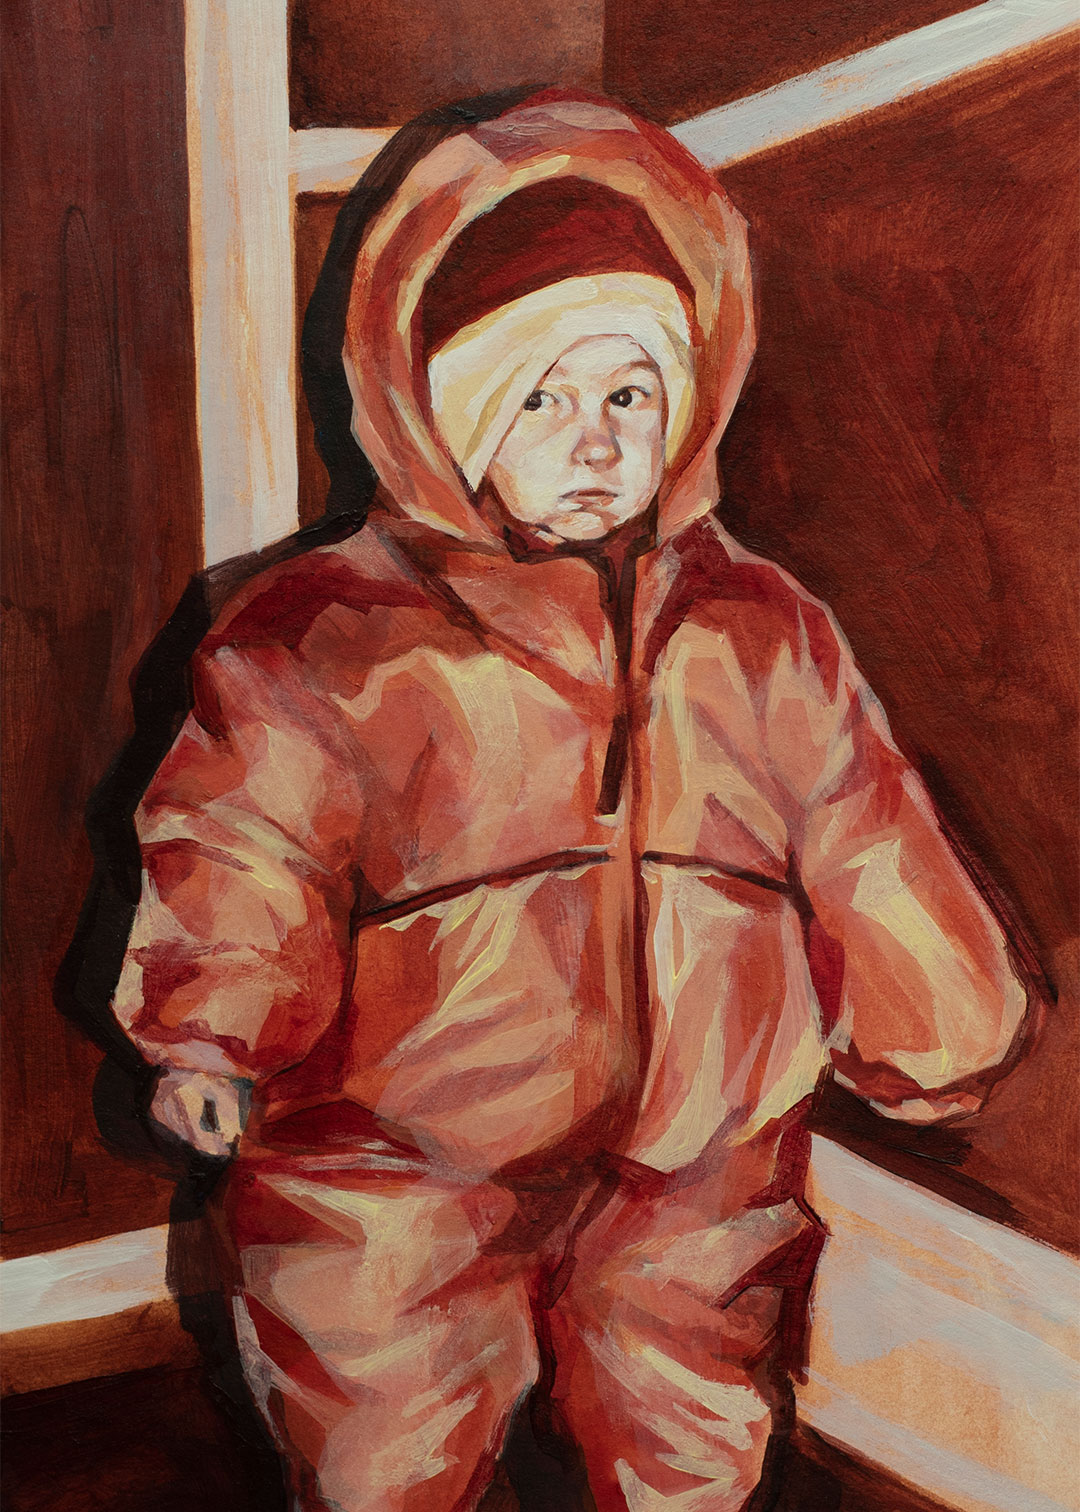 Portrait painting of a toddler wearing a full-body winter suit.